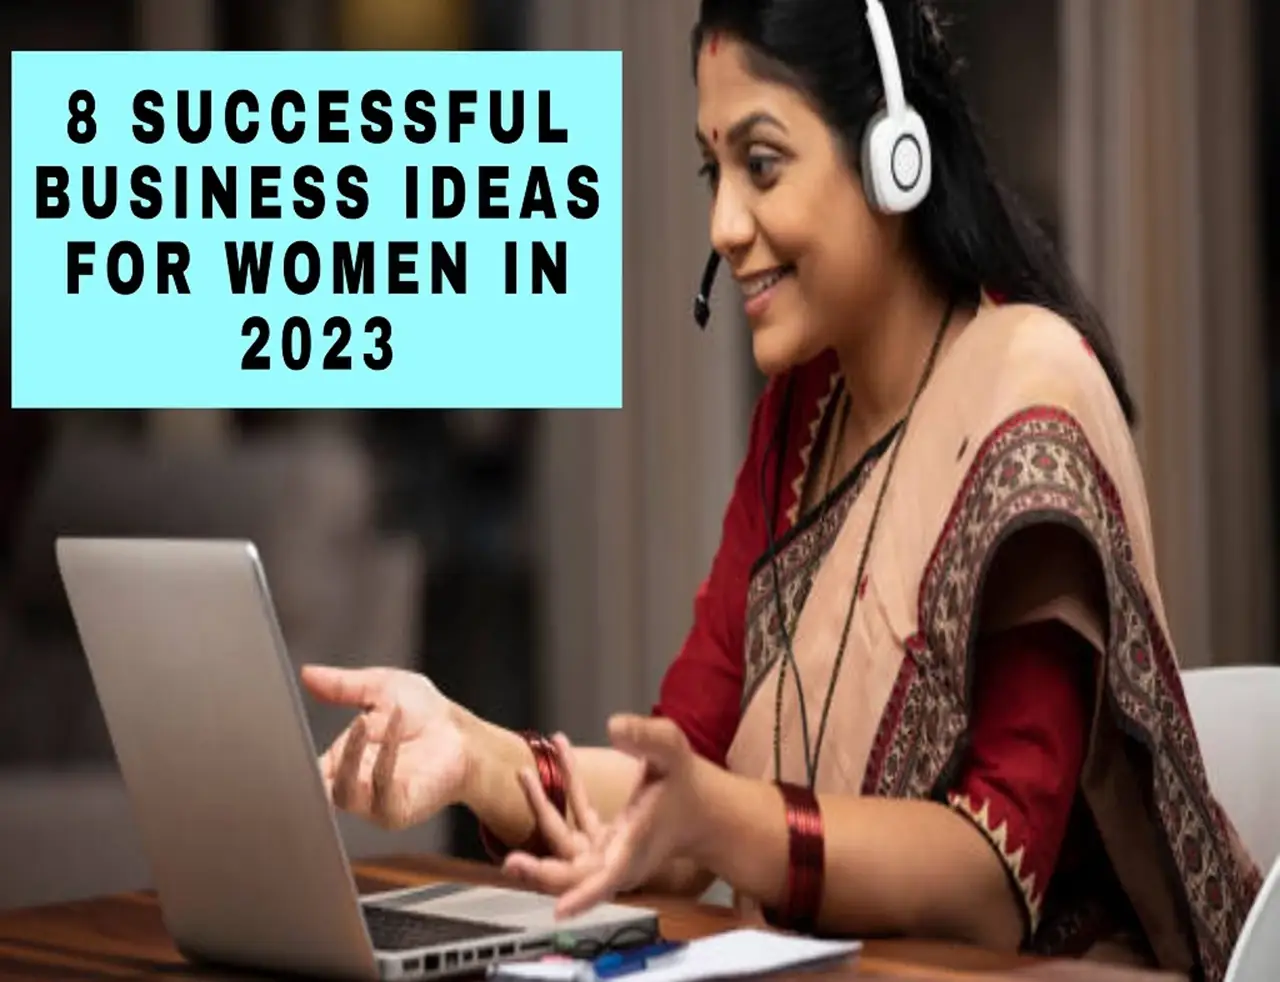 Successful Business Ideas: 8 Businesses Women Can Start in 2023 to Make Huge Profit